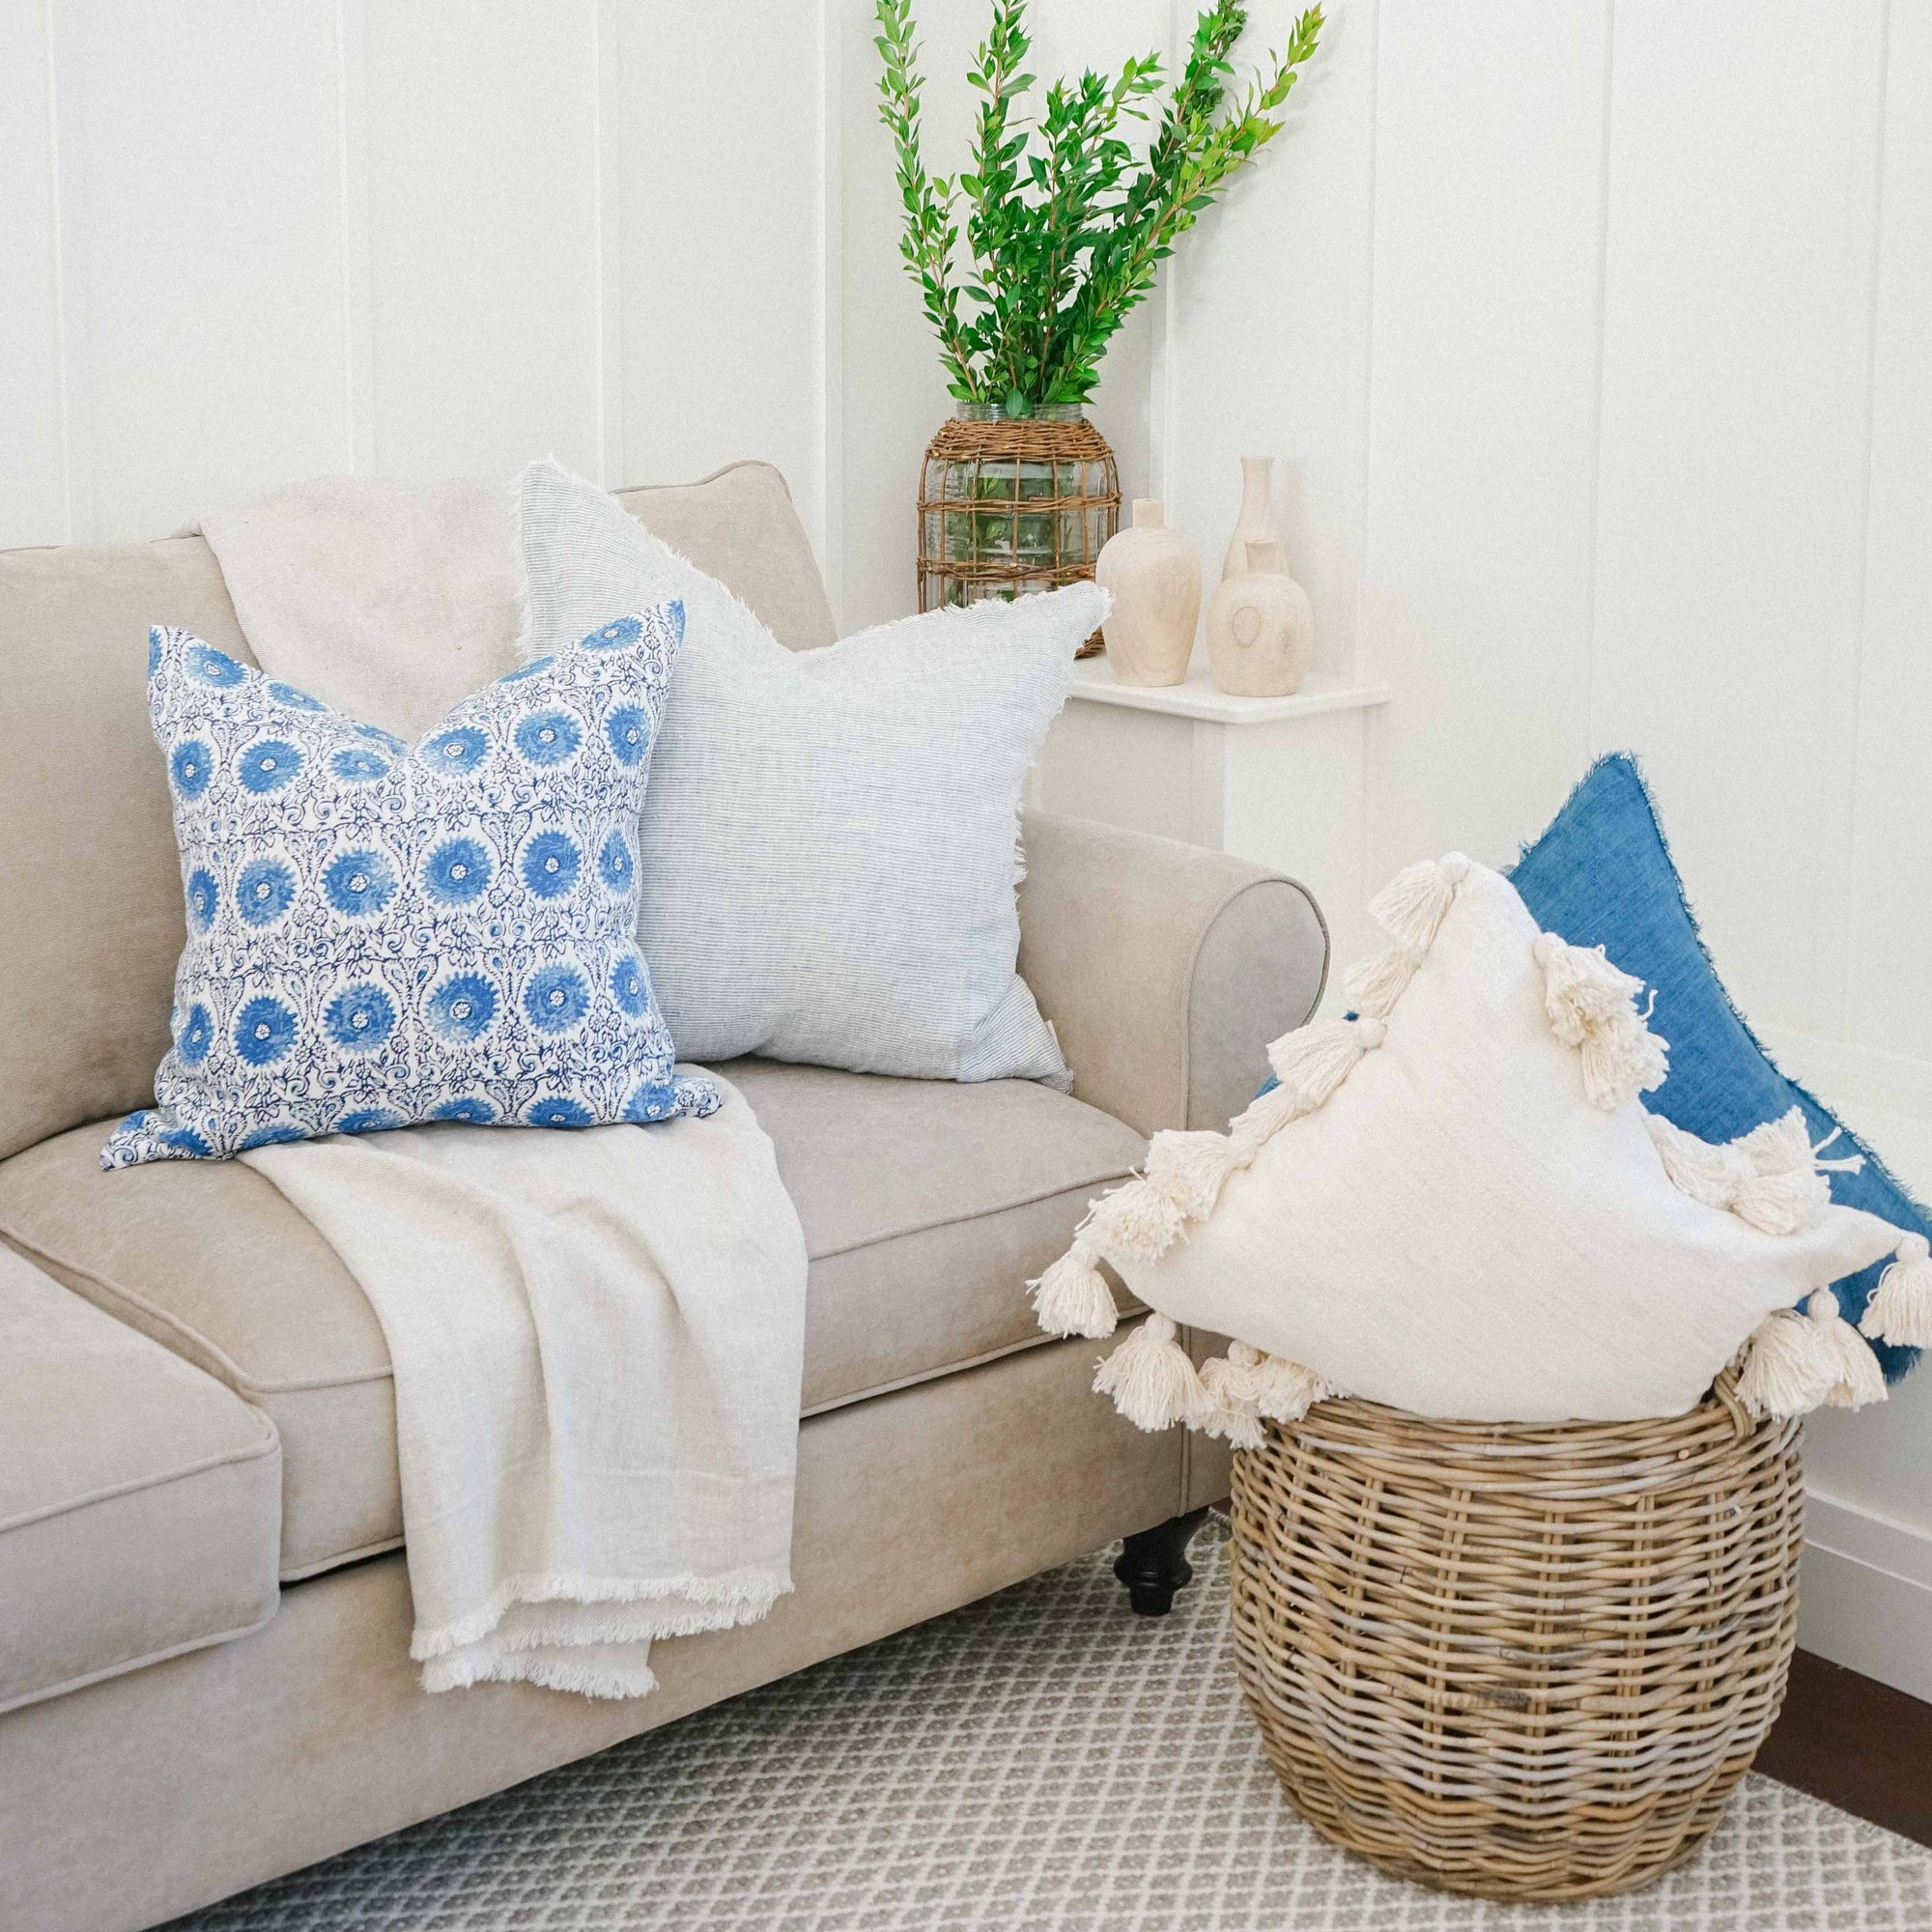 5 Spring Decorating Ideas to Refresh Your Home